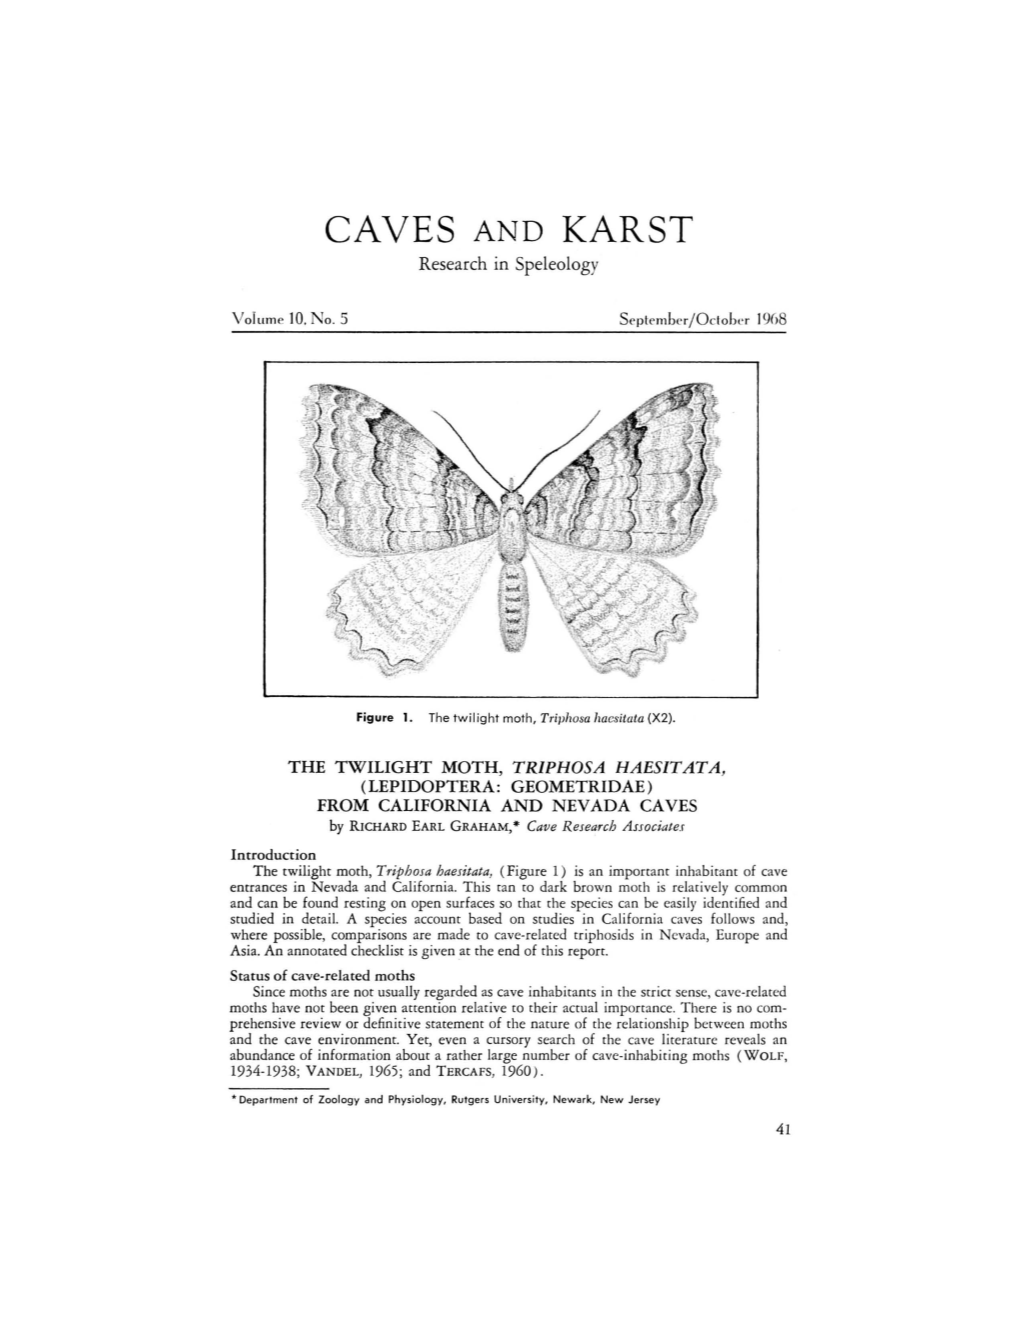 CAVES and KARST Research in Speleology